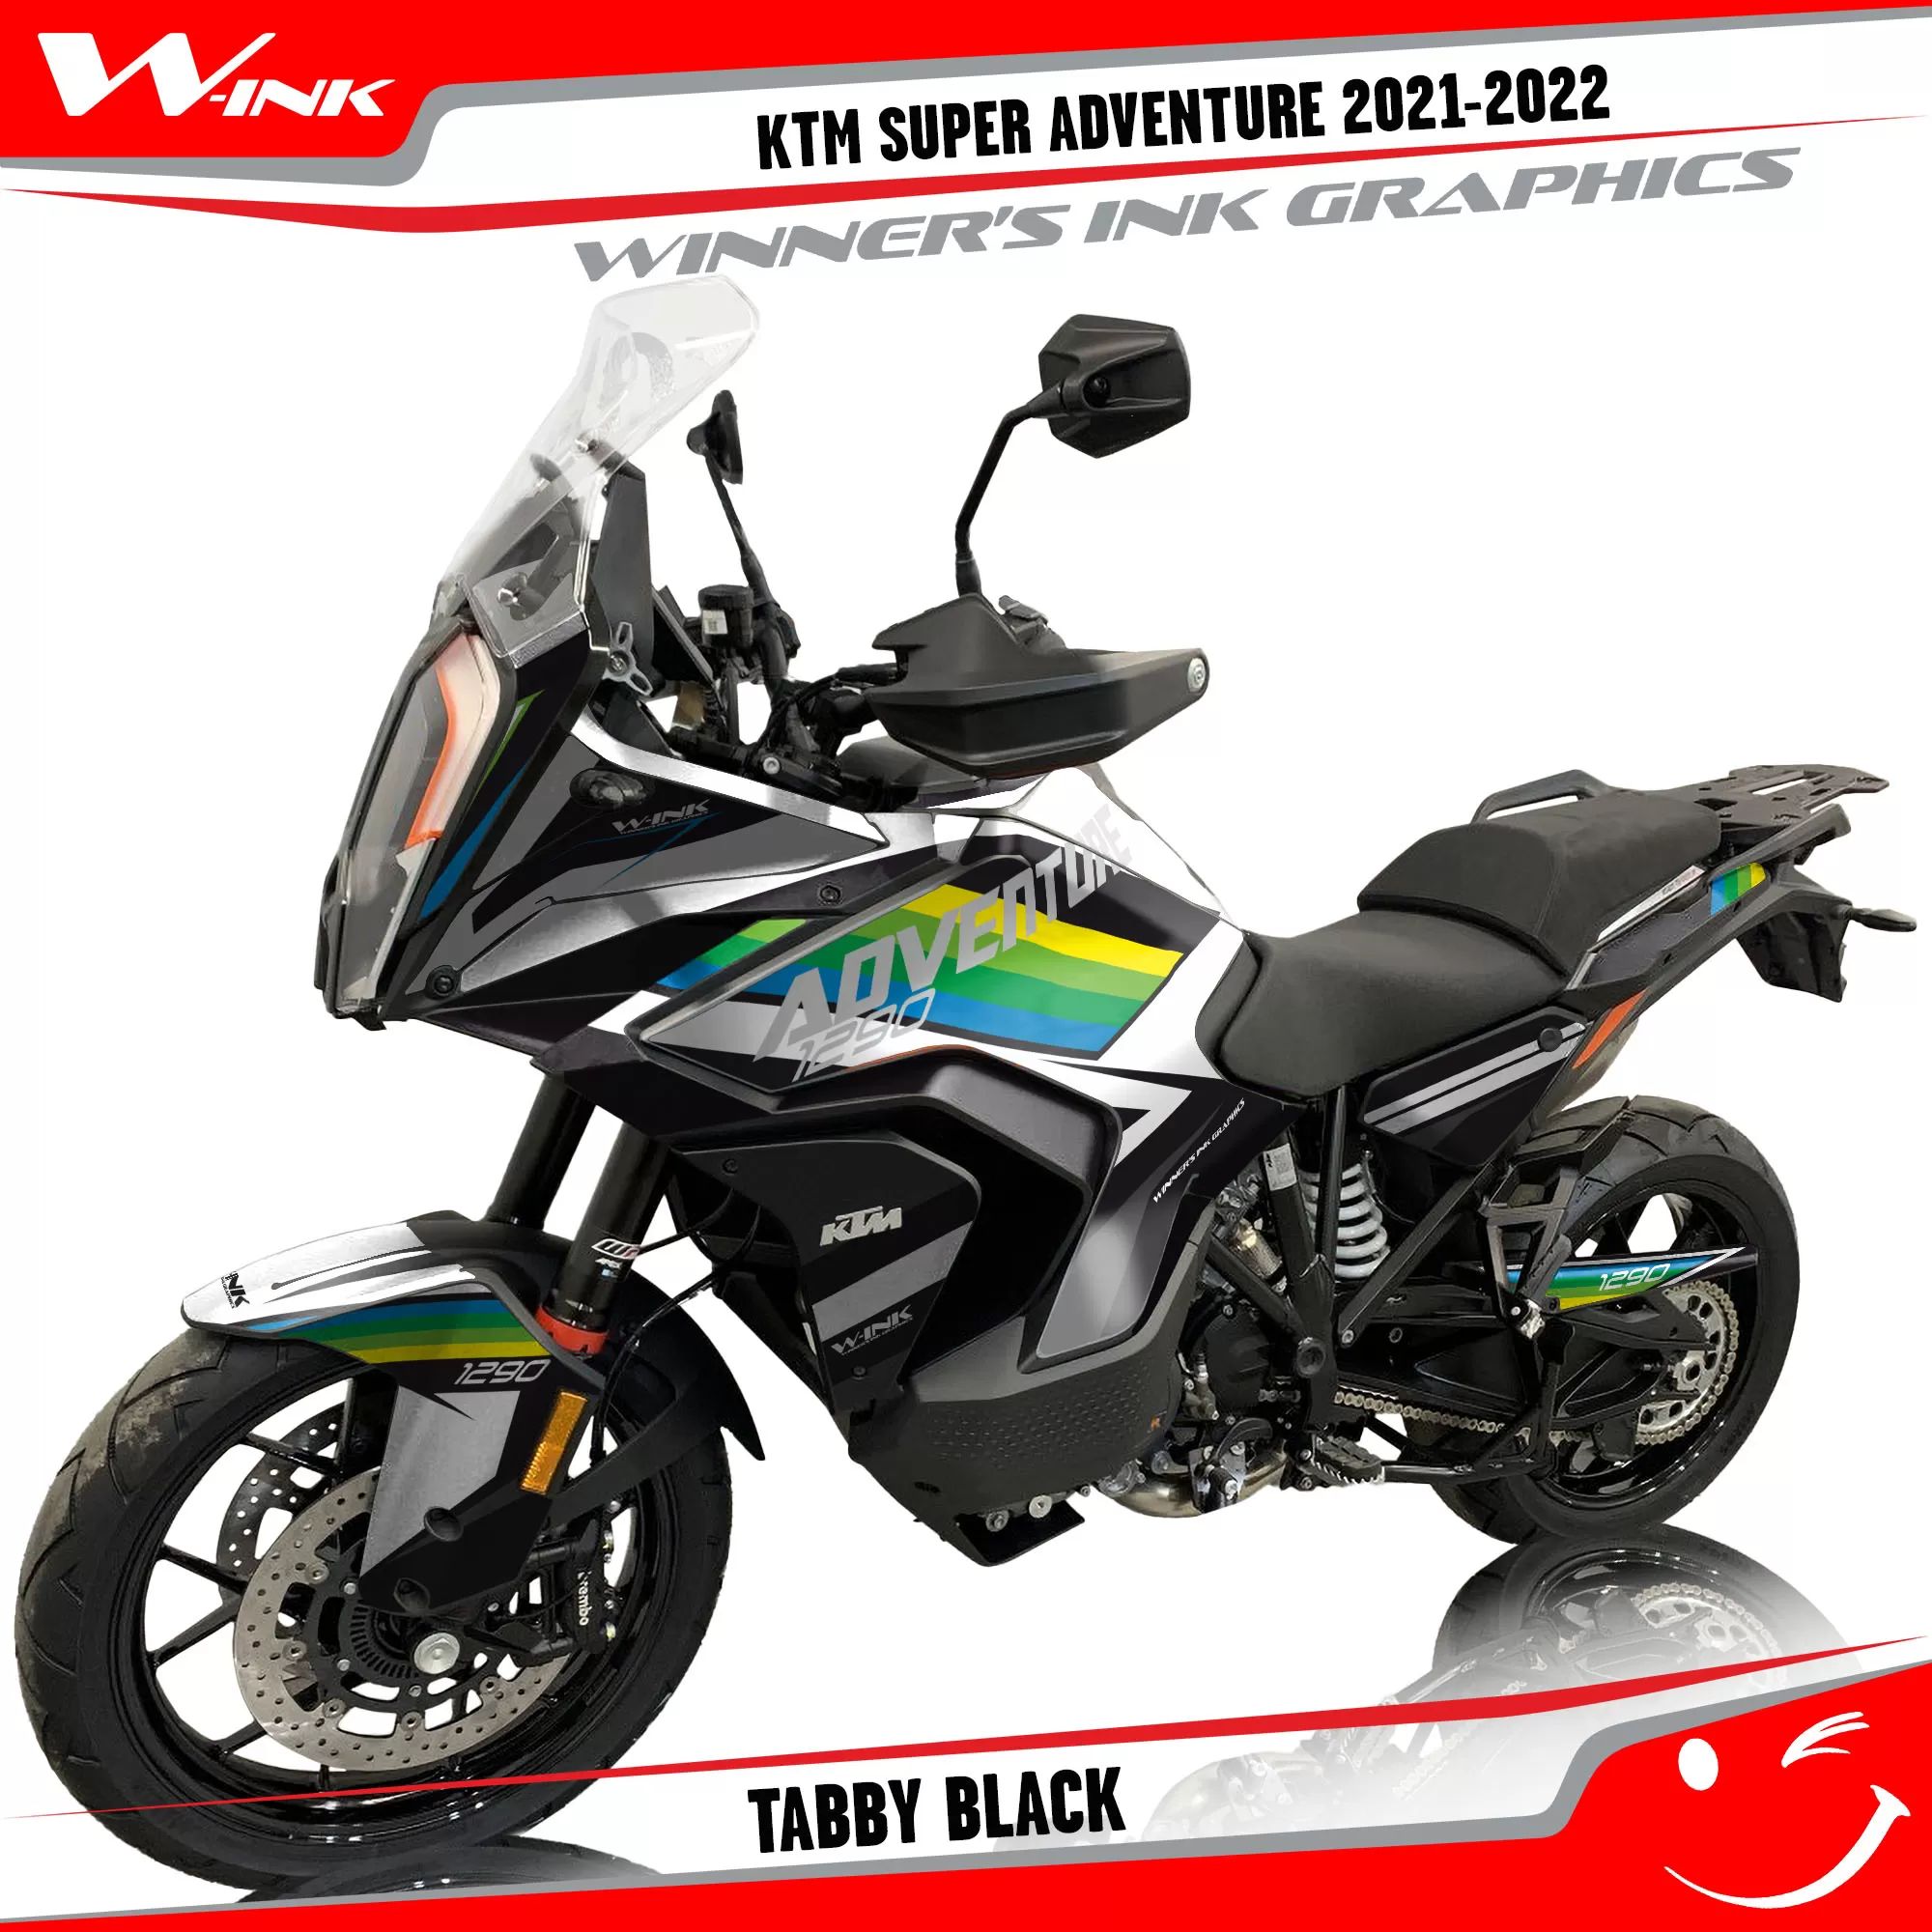 KTM-Super-Adventure-S-2021-2022-graphics-kit-and-decals-with-designs-Tabby-Black